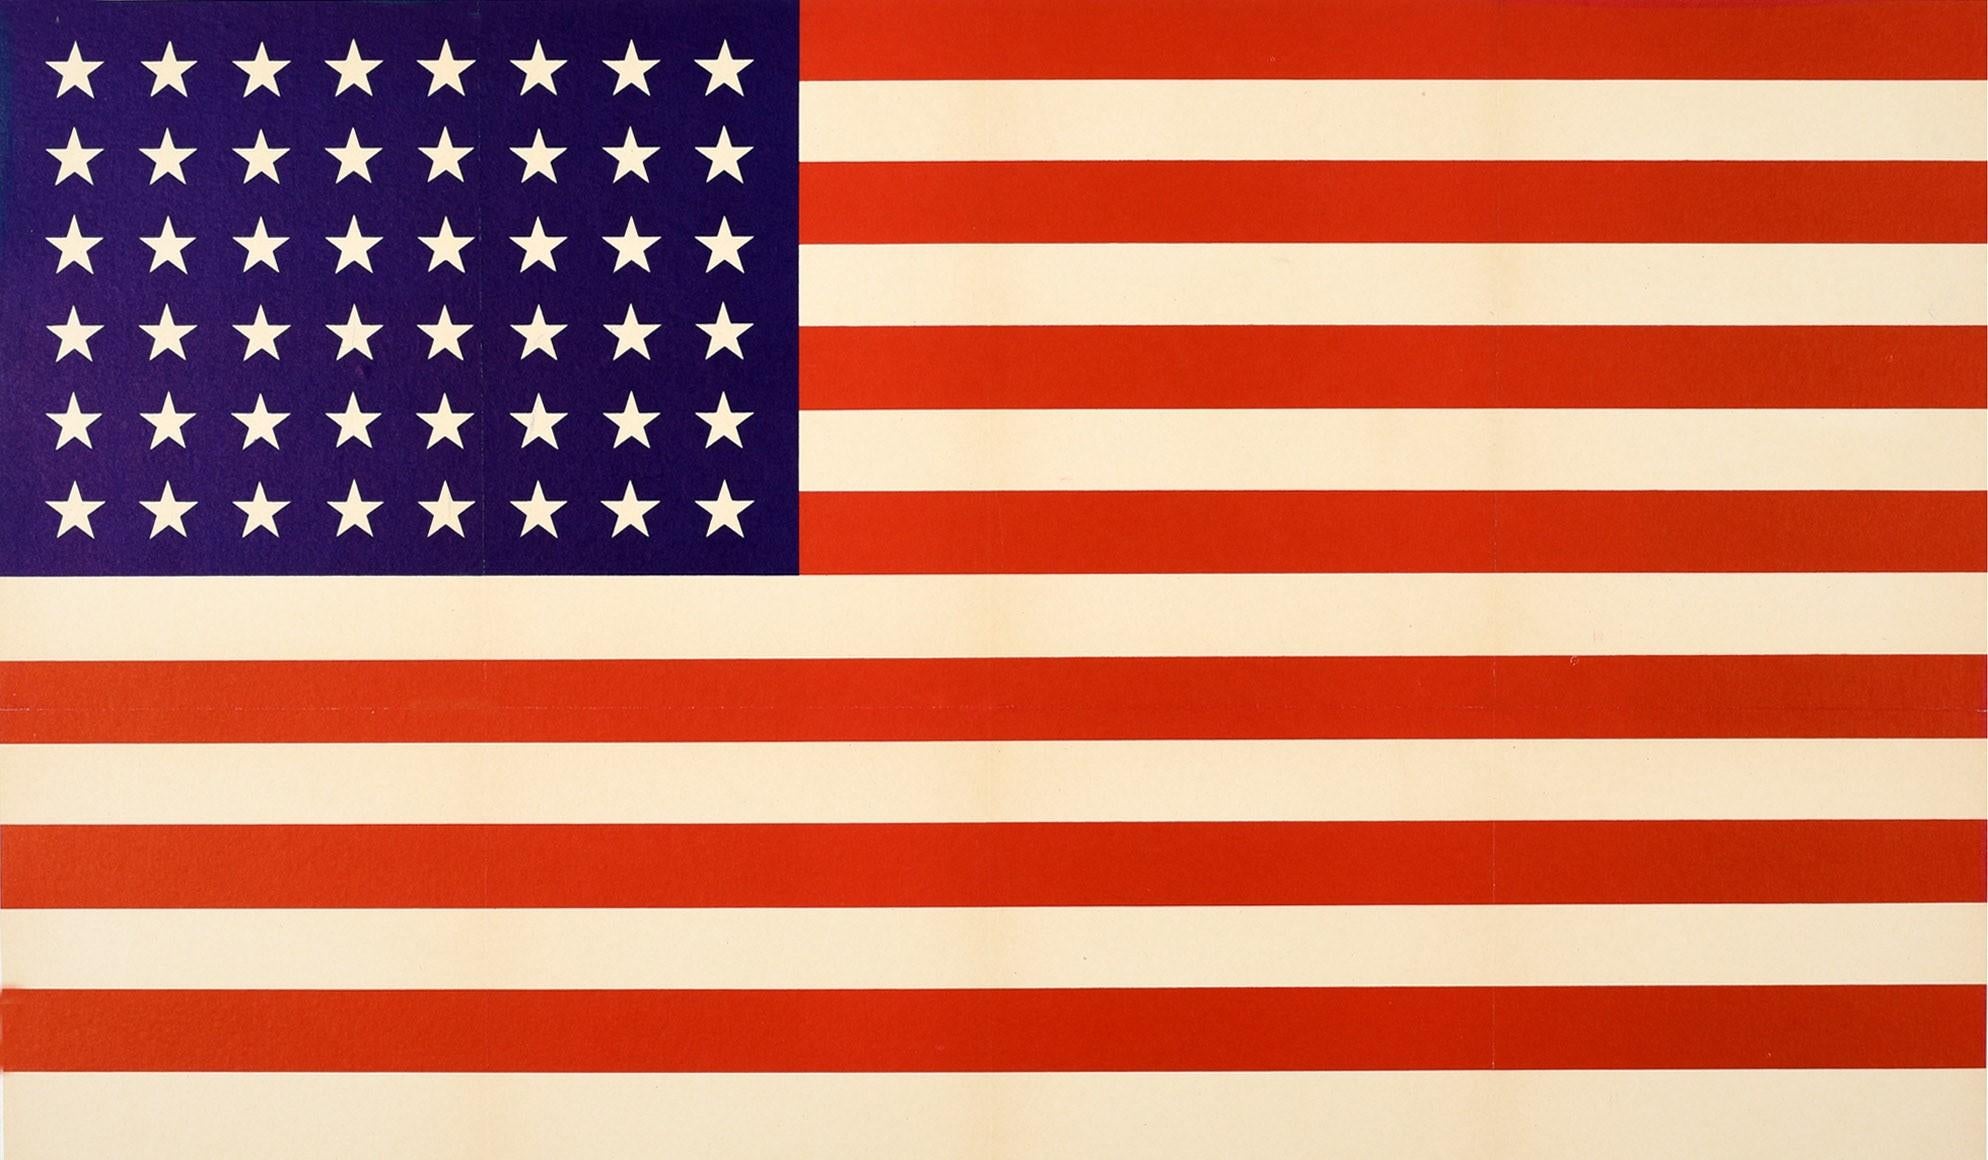 Original vintage World War Two propaganda poster issued by the United States Office of War Information to encourage all Americans to serve their country on the home front as well as on the front line. Dynamic design depicting the stars and stripes